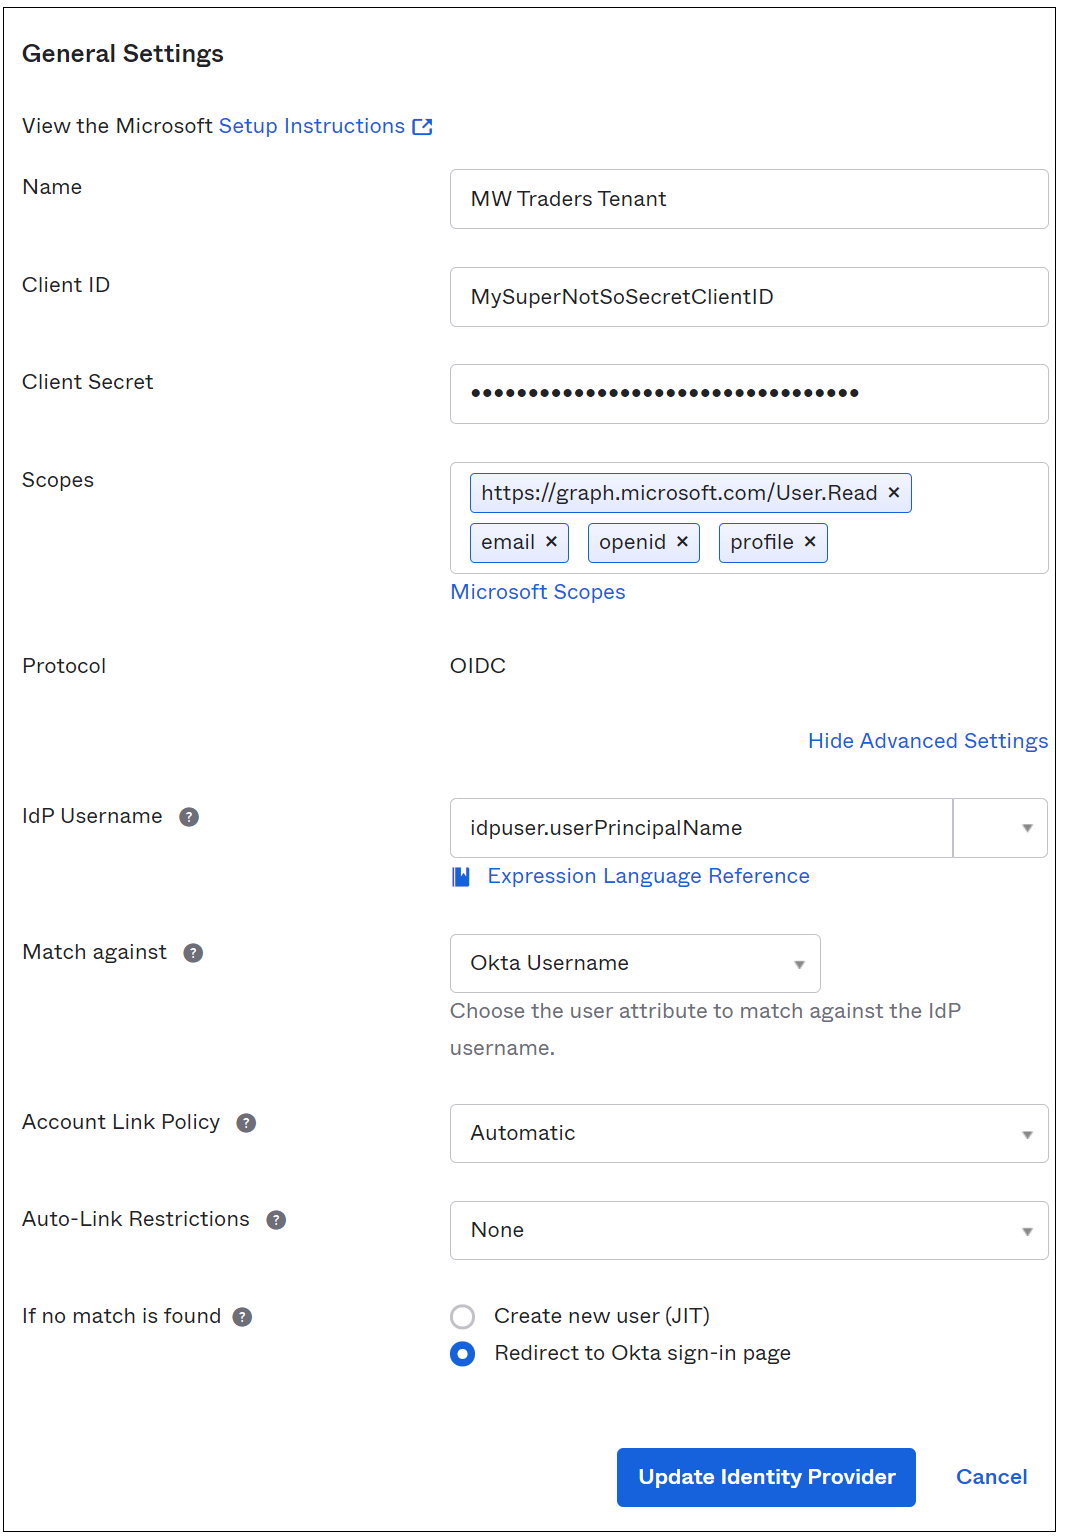 Screenshot of the General Settings page in the Okta admin portal. The option for redirecting to the Okta sign-in page appears.